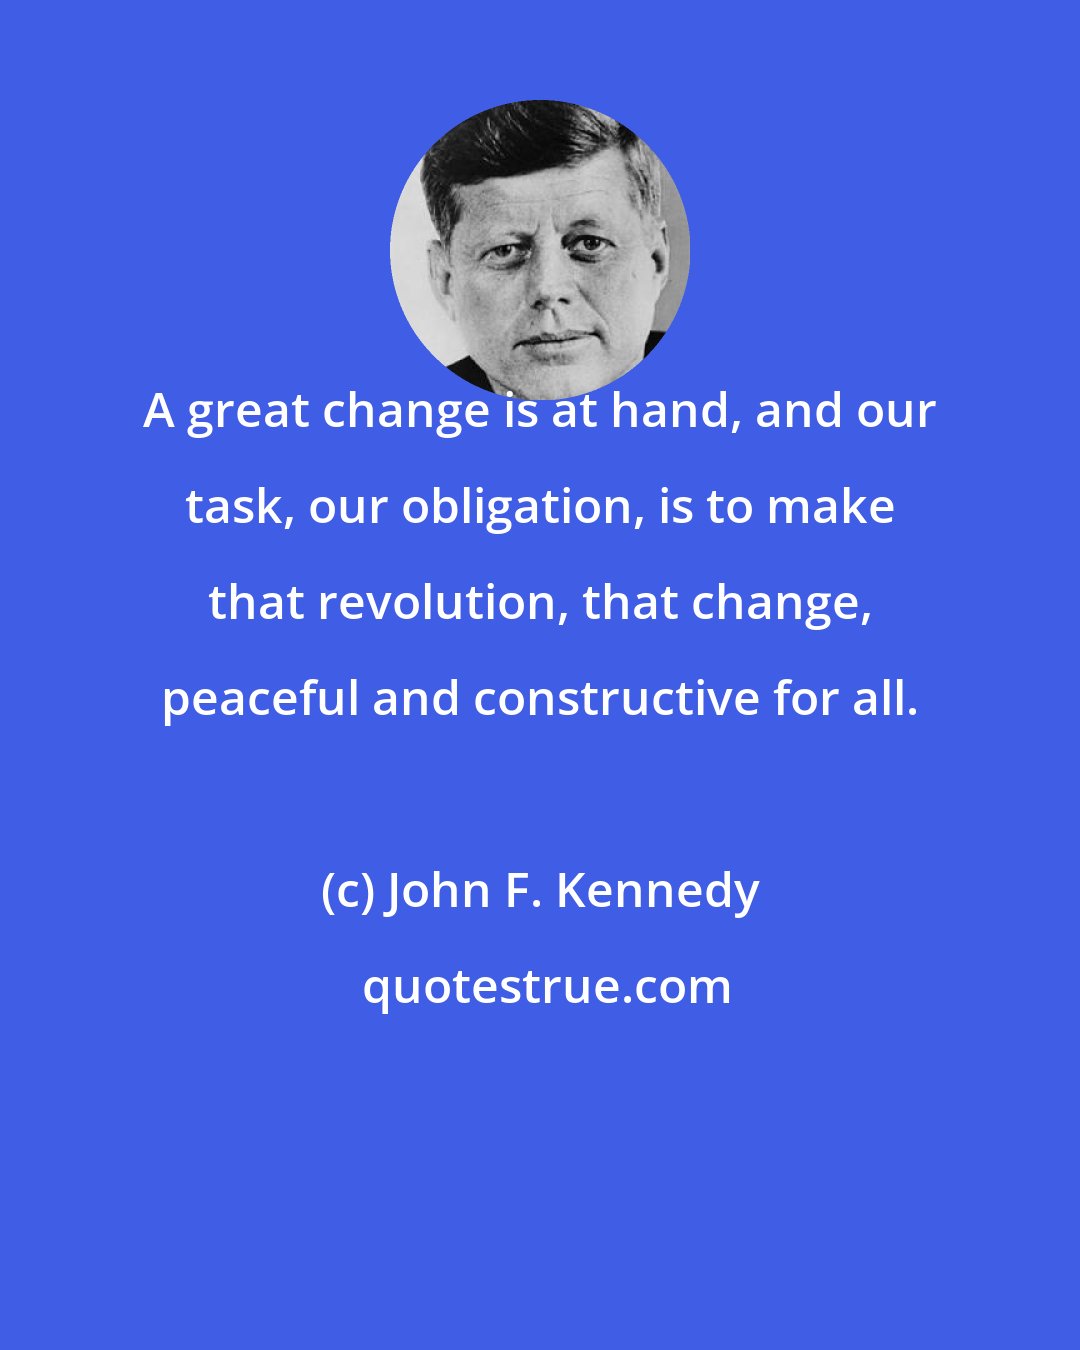 John F. Kennedy: A great change is at hand, and our task, our obligation, is to make that revolution, that change, peaceful and constructive for all.